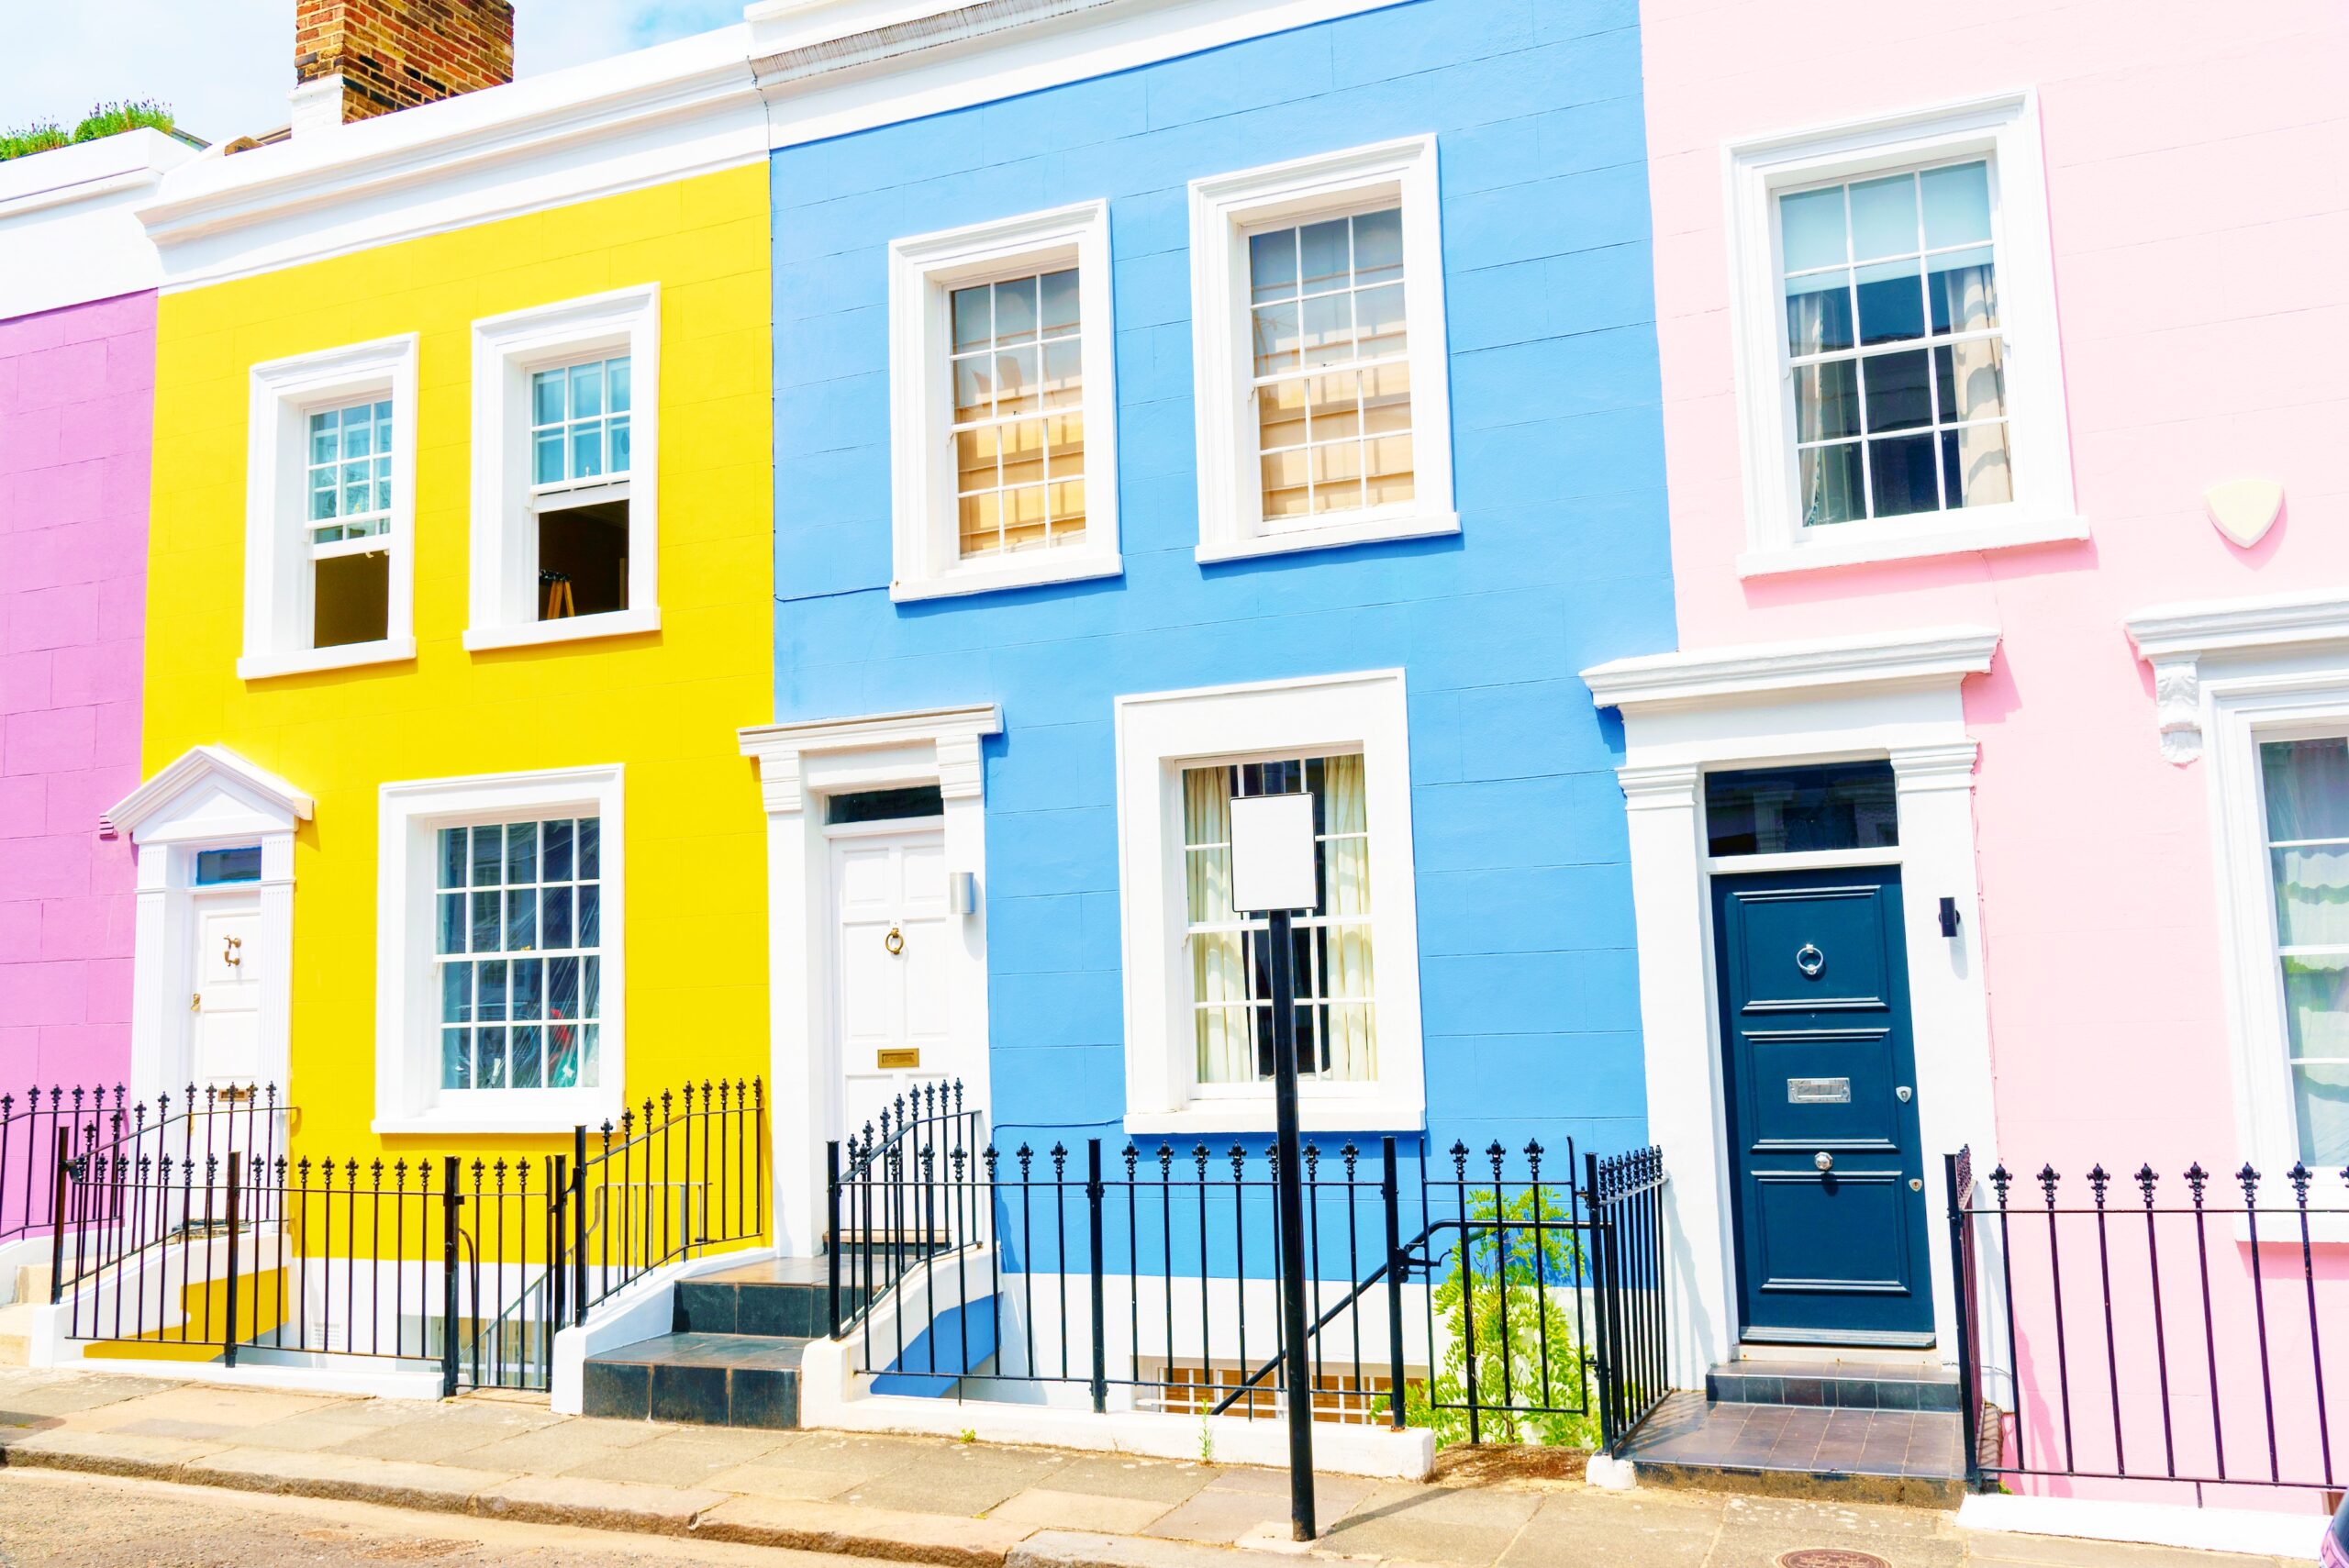 <img src="colourful.jpg" alt="colourful dream home in Notting Hill"/>